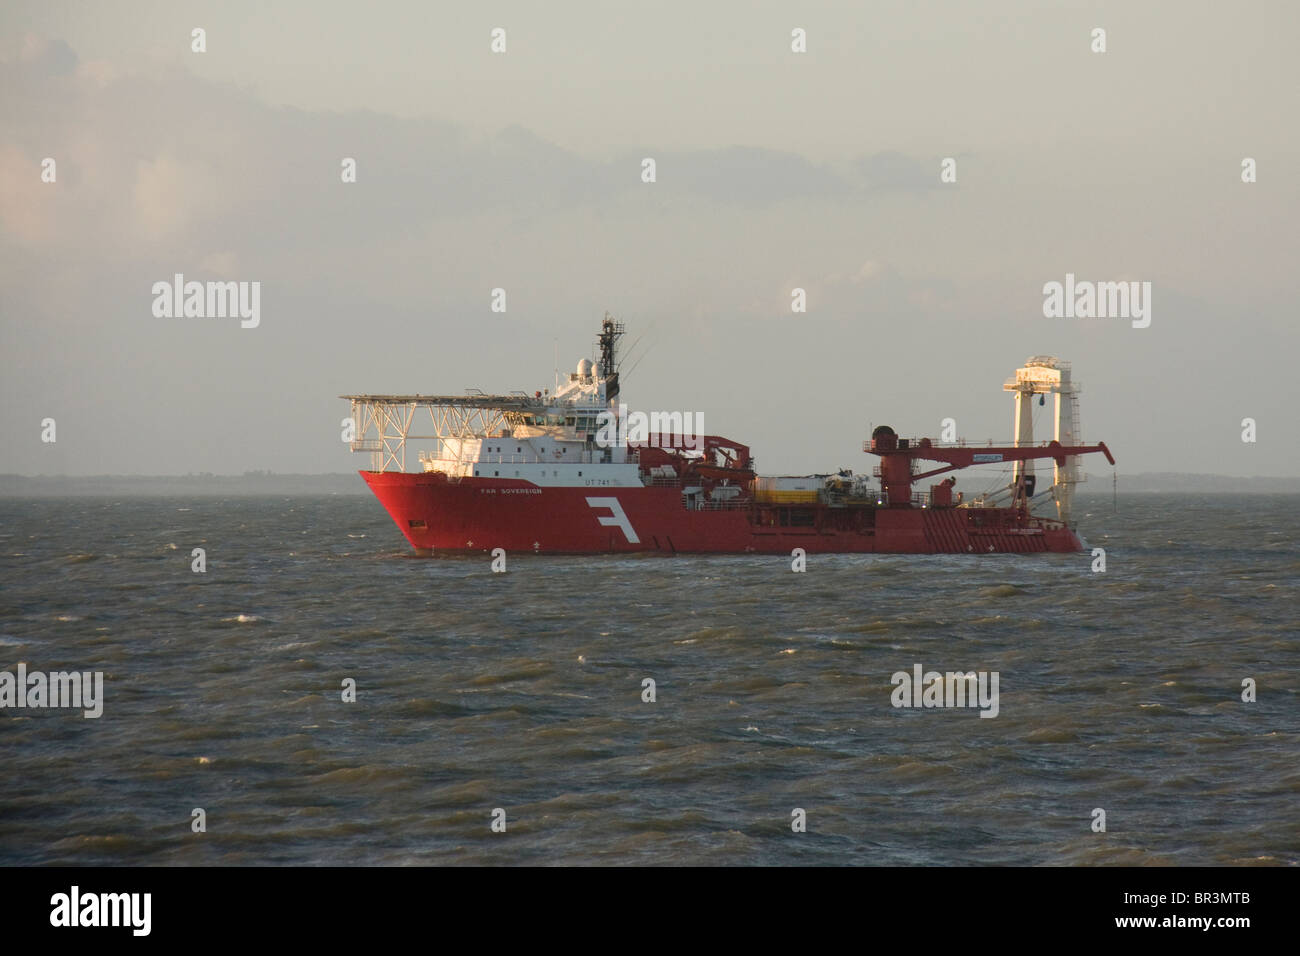 off shore multy supply vessel or msv also called dp vessel with helipad onboard Stock Photo